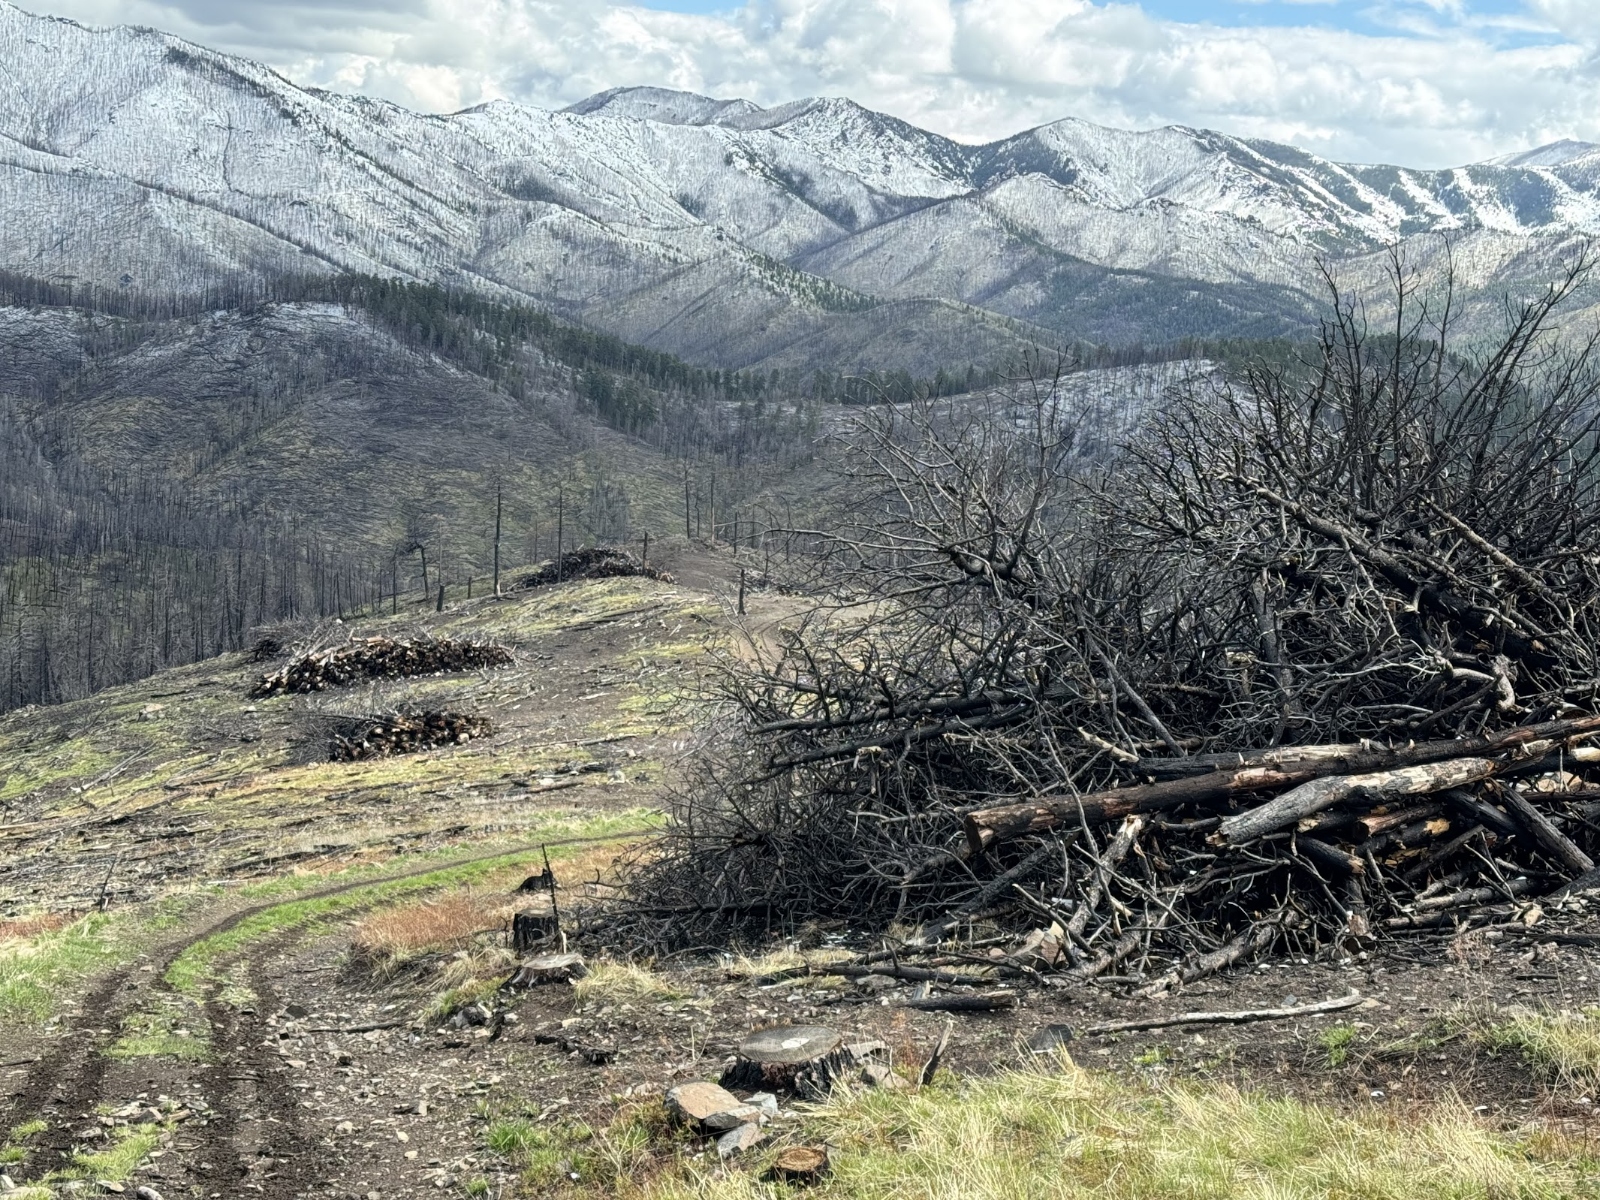 An overview of burned forest lands in Montana, with a pile of woody debris in the foreground and mountains in the background